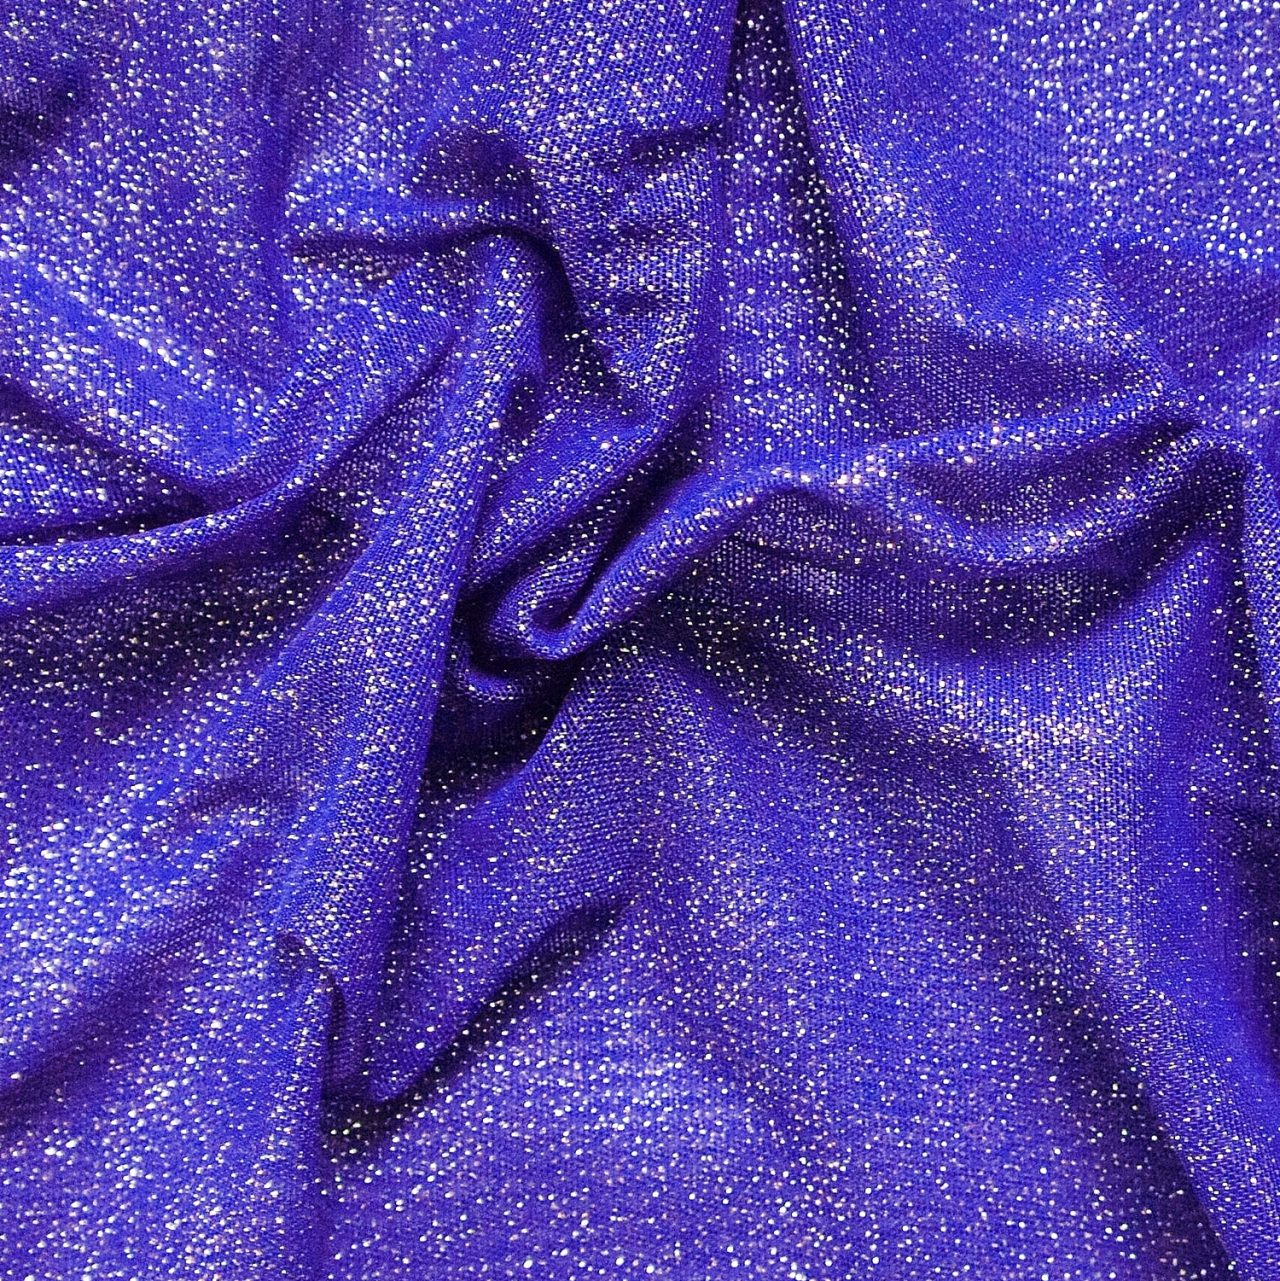 Purple Sequin Fabric by The Yard, Glitter Sequin Mesh